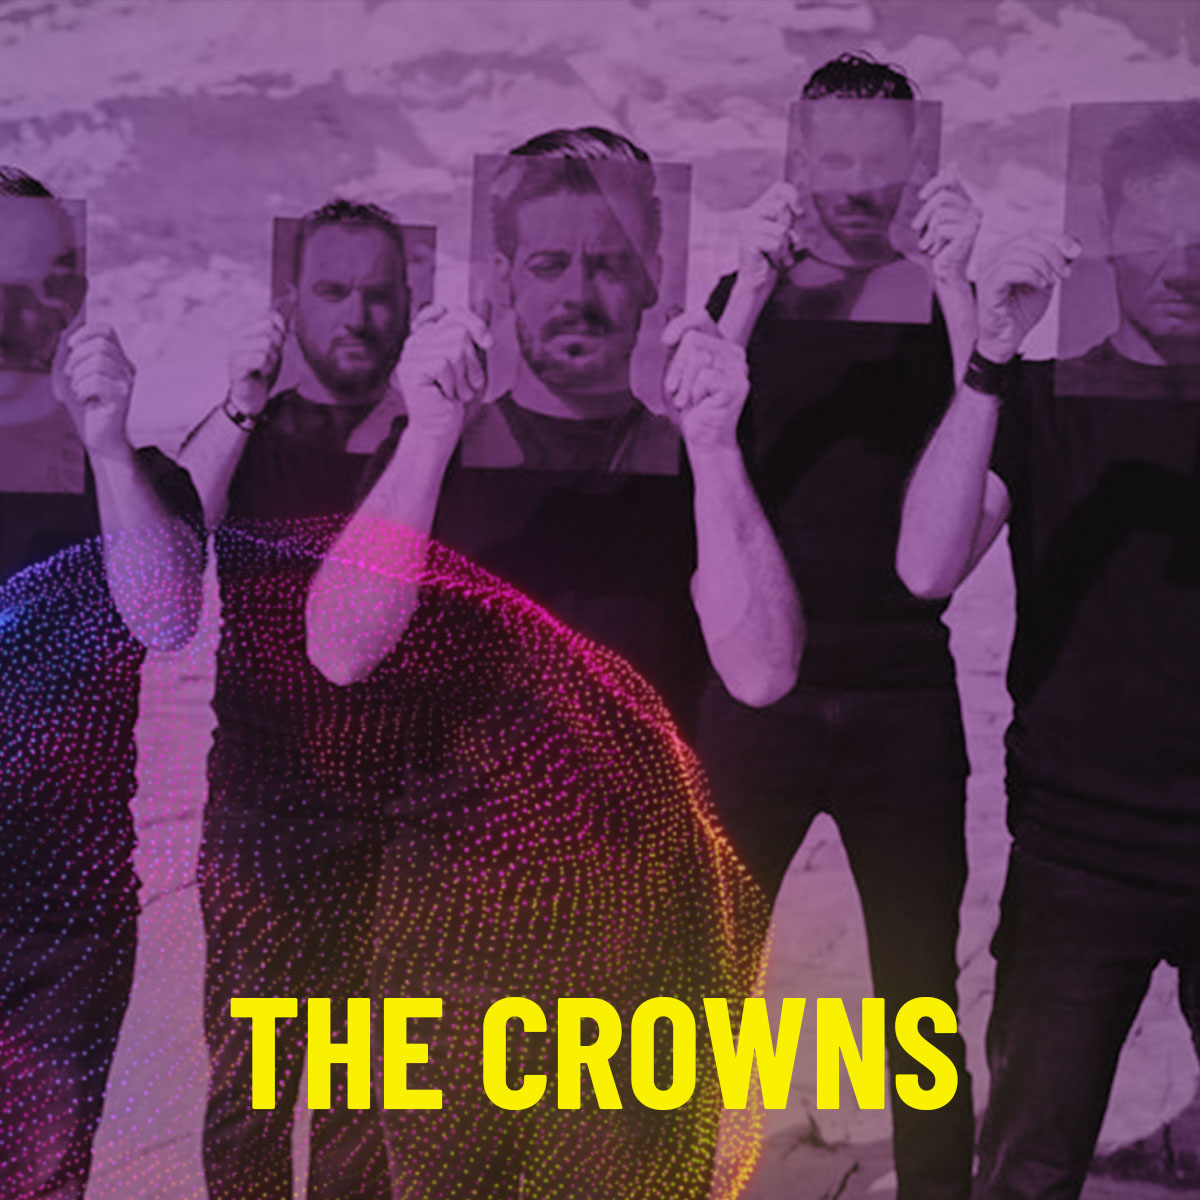 02 - THE CROWNS